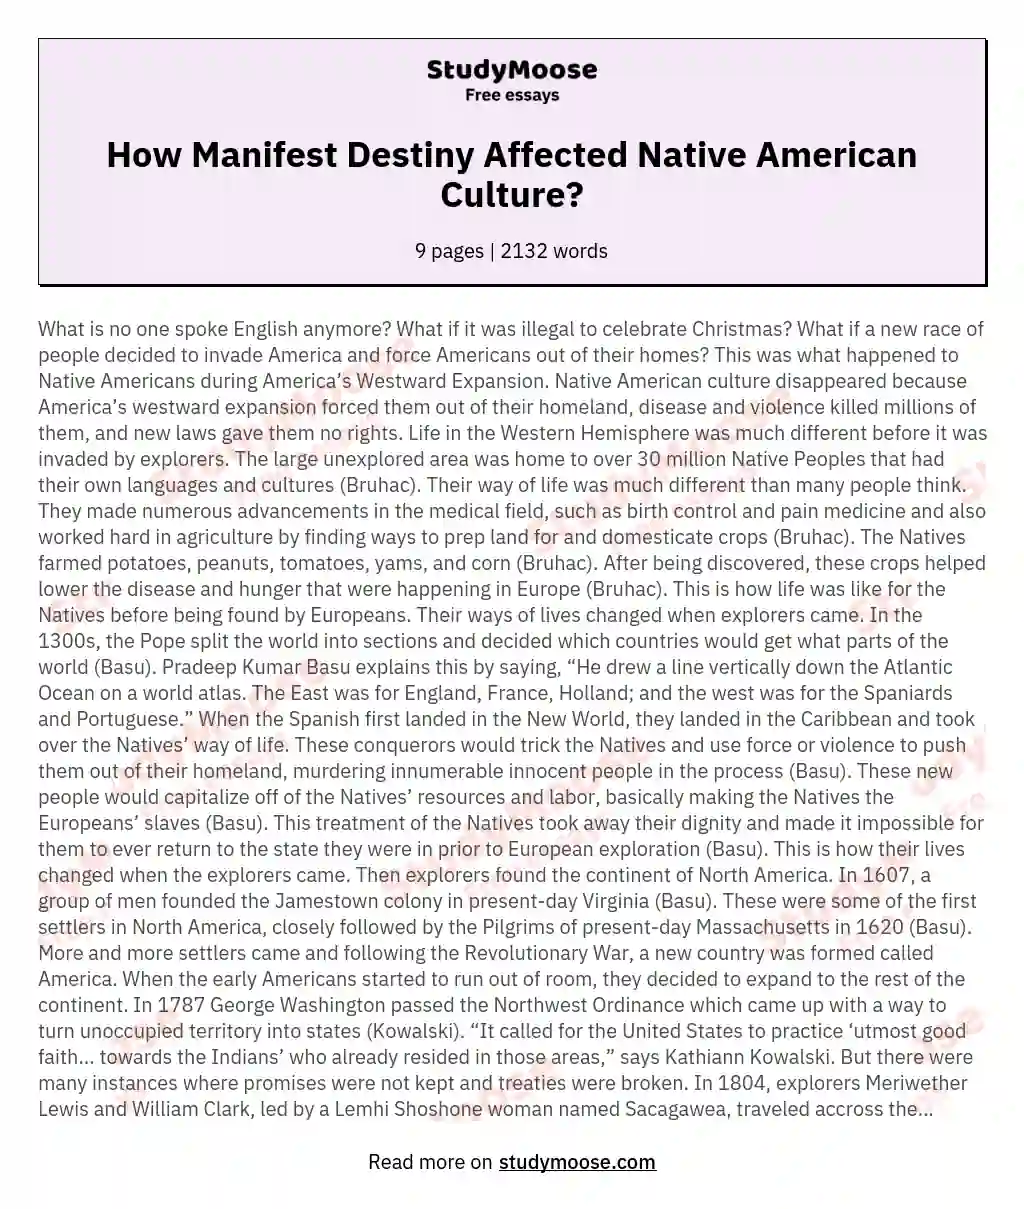 How Manifest Destiny Affected Native American Culture?